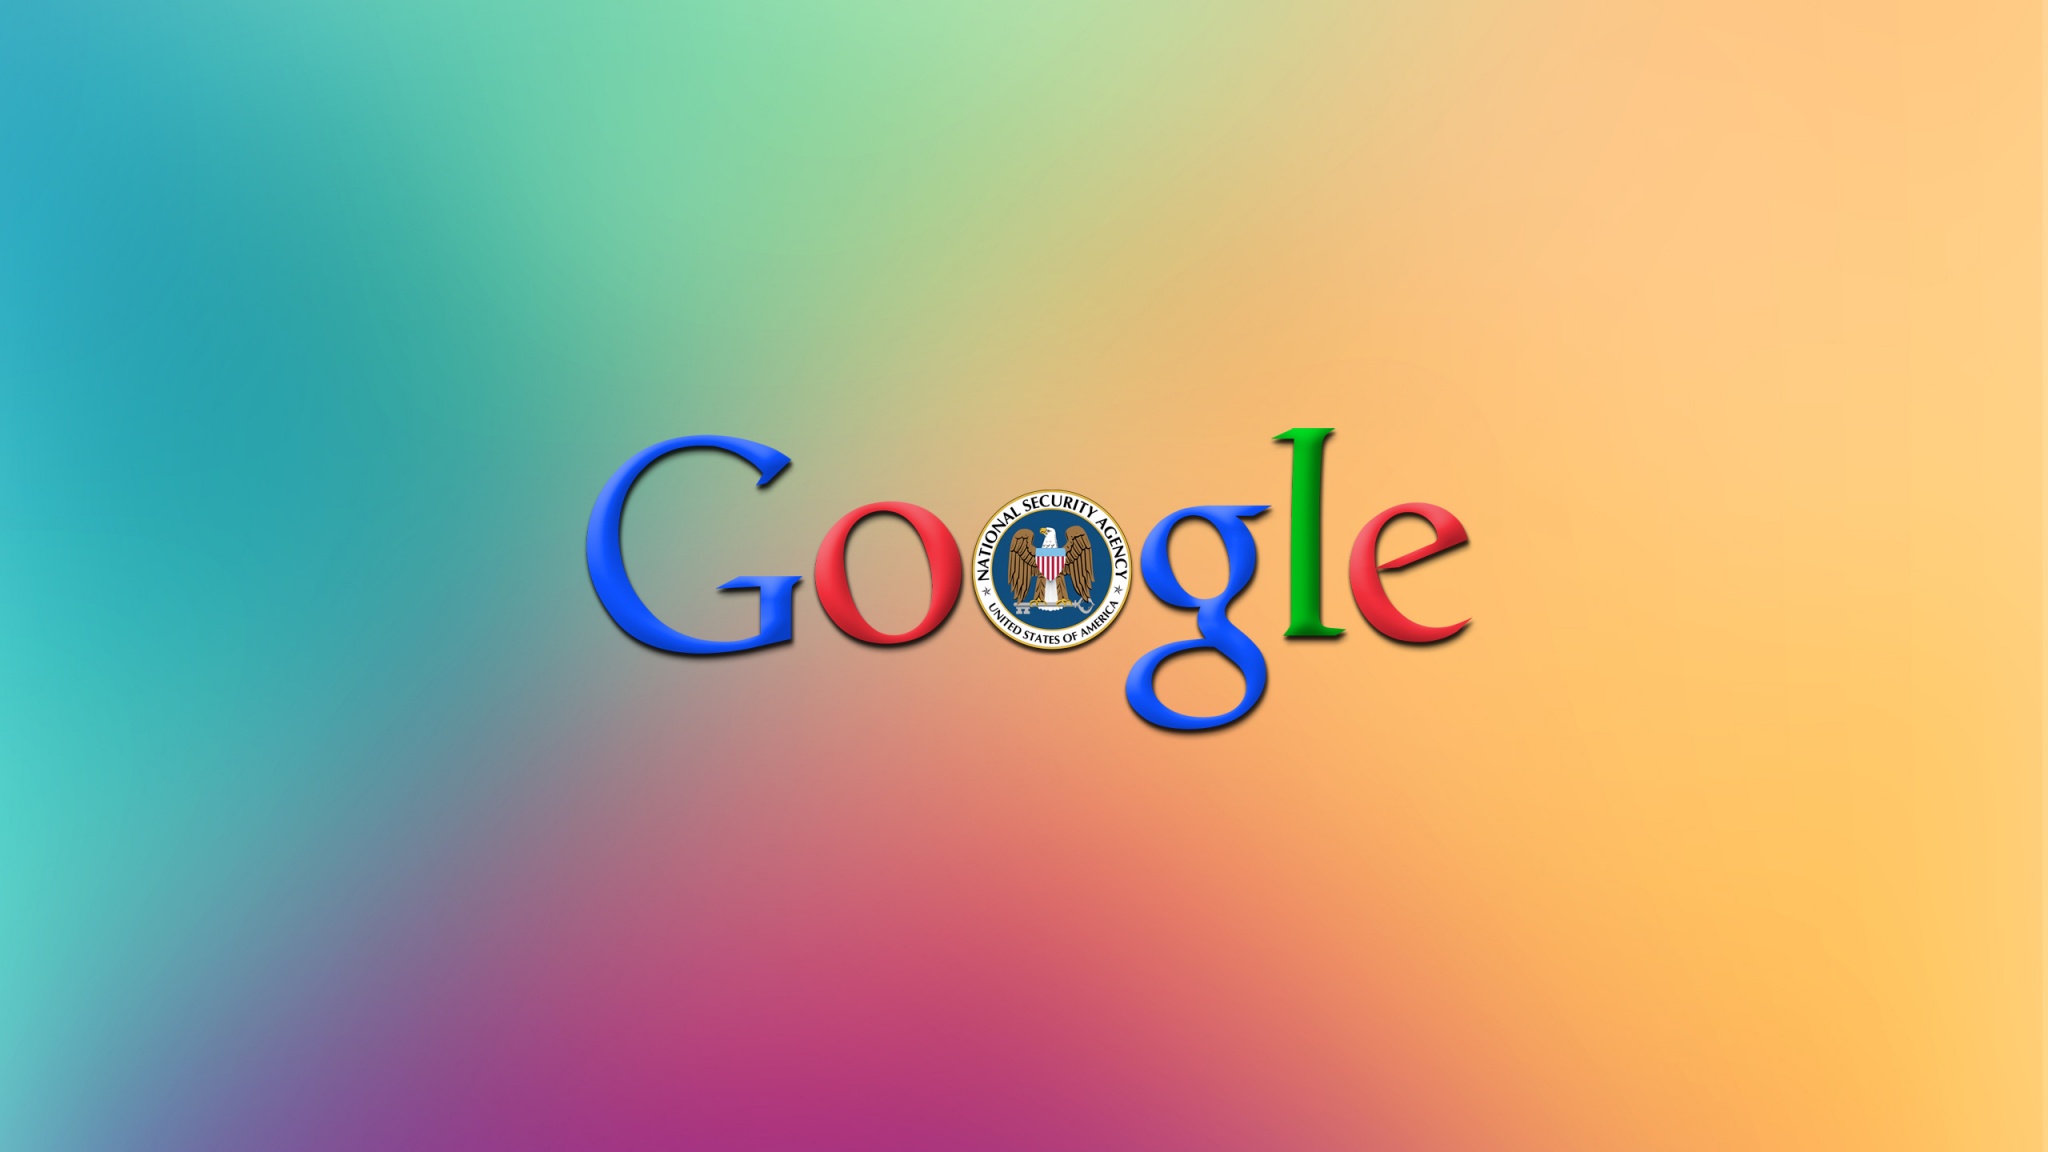 Google Colorful Background Wallpaper